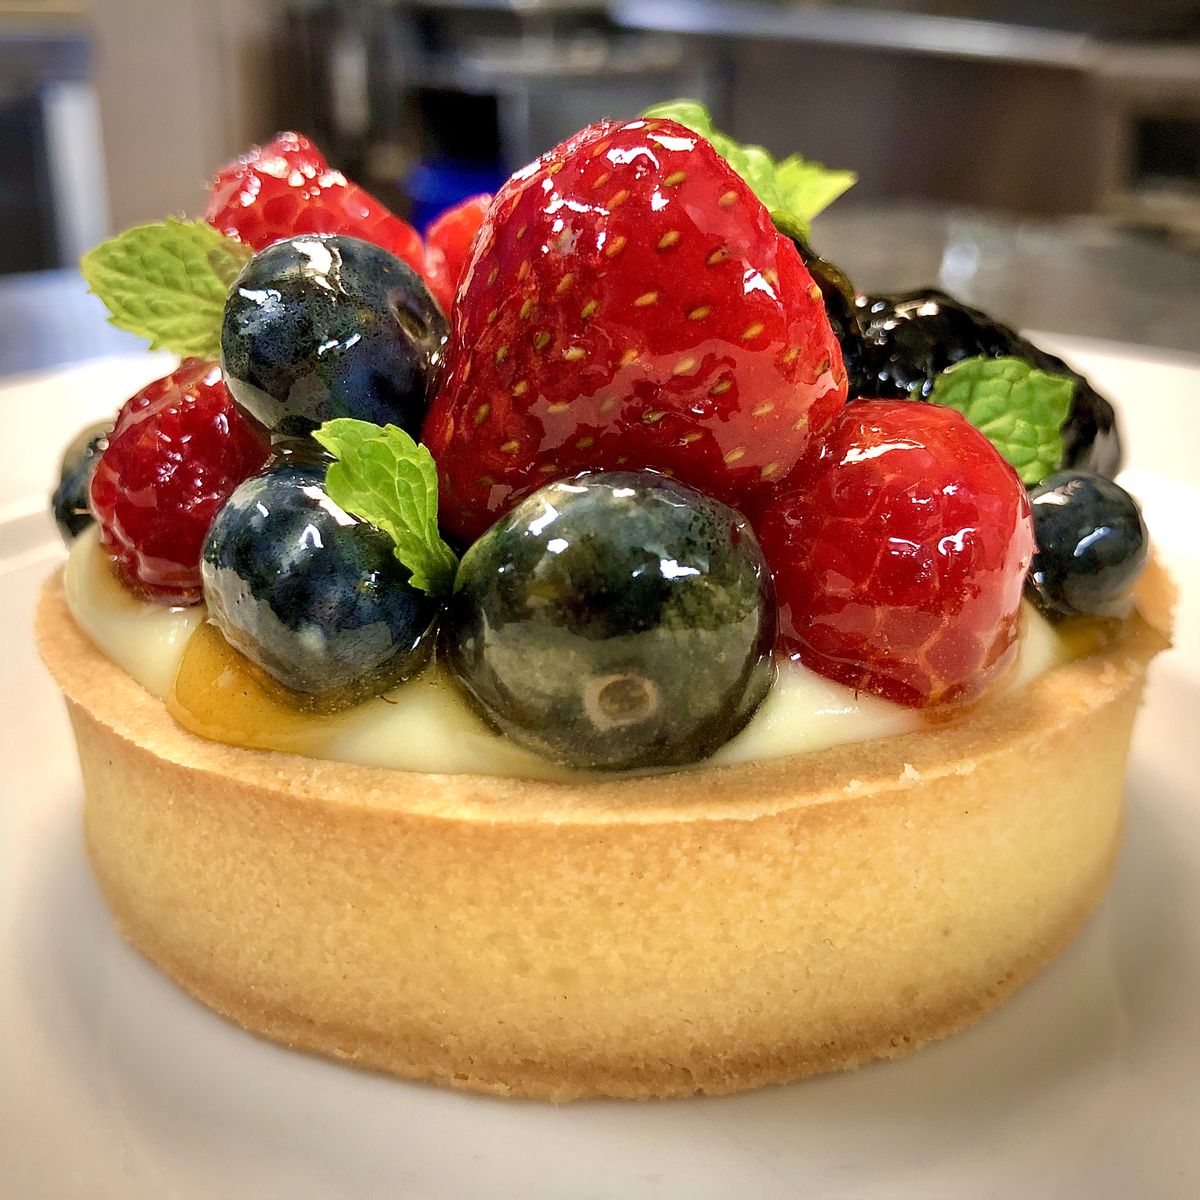 A custard filled pastry tart topped strawberries, blueberries, and mint